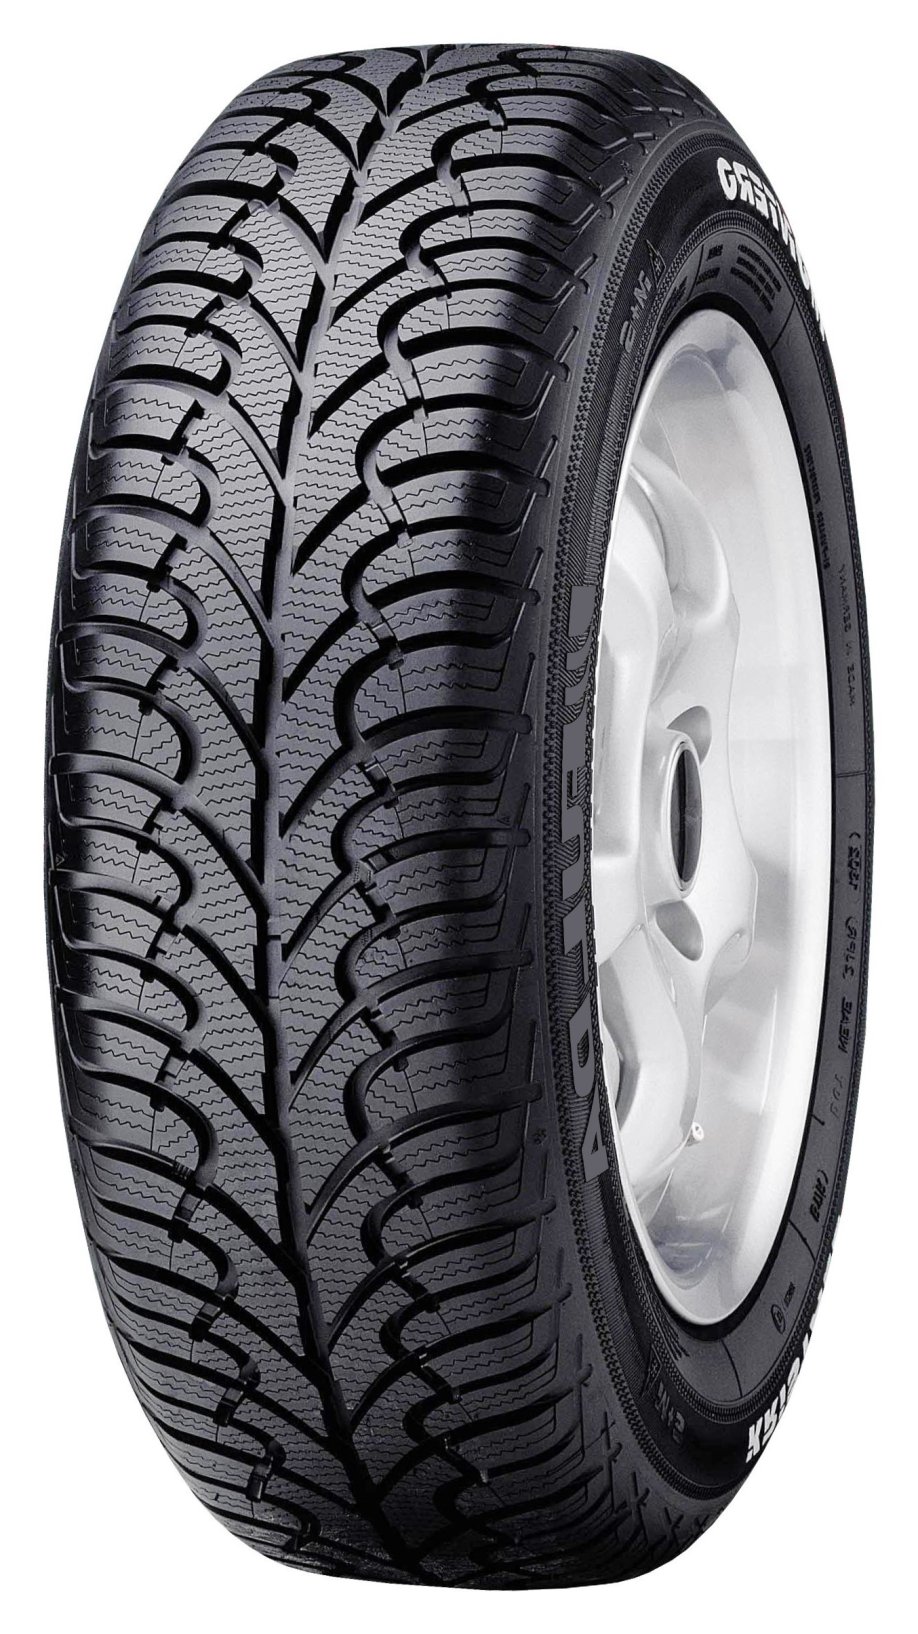 Gomme Nuove Fulda 175/65 R15 84T MONT2 M+S pneumatici nuovi Invernale